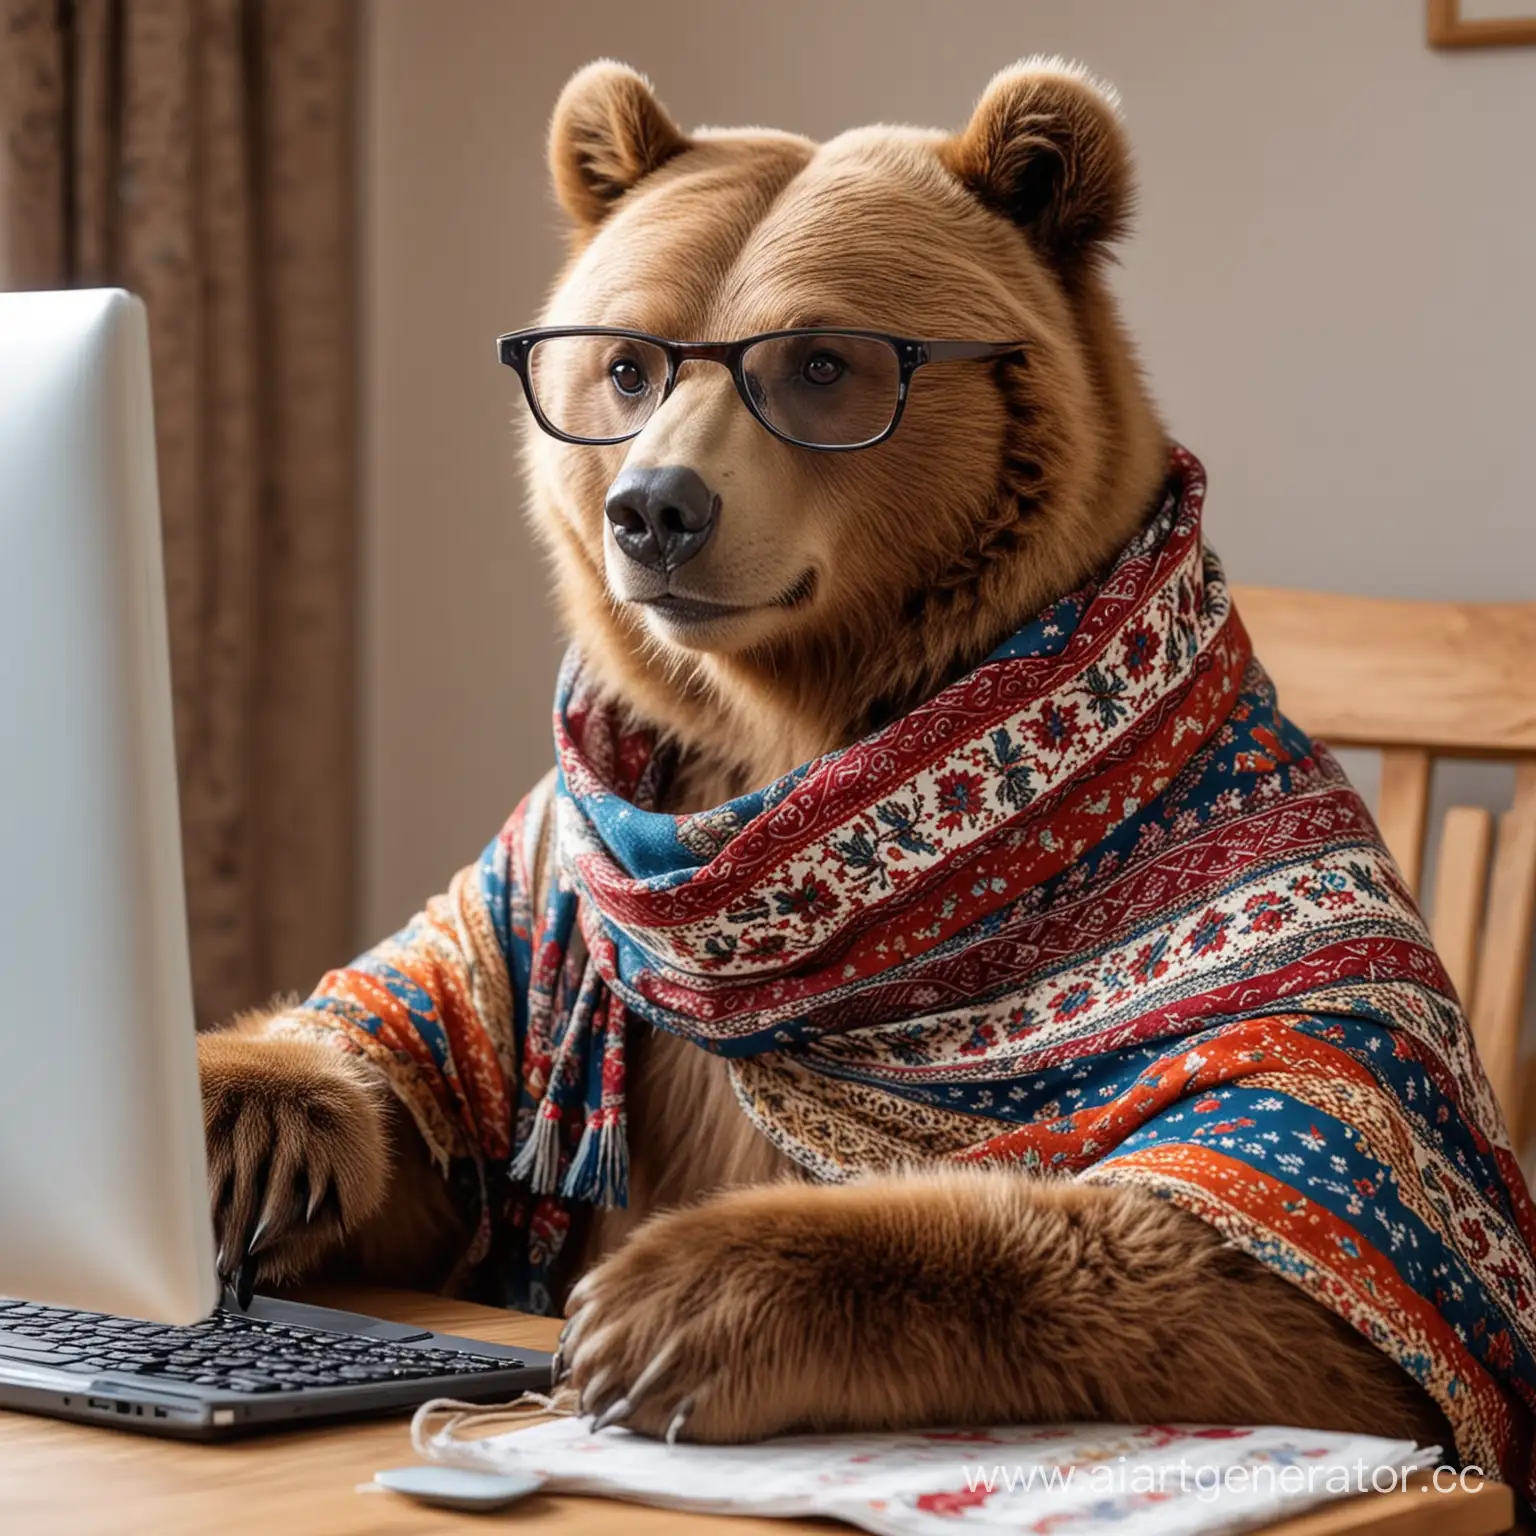 Brown-Bear-Wearing-Russian-Scarf-Designs-Glasses-While-Working-on-Computer